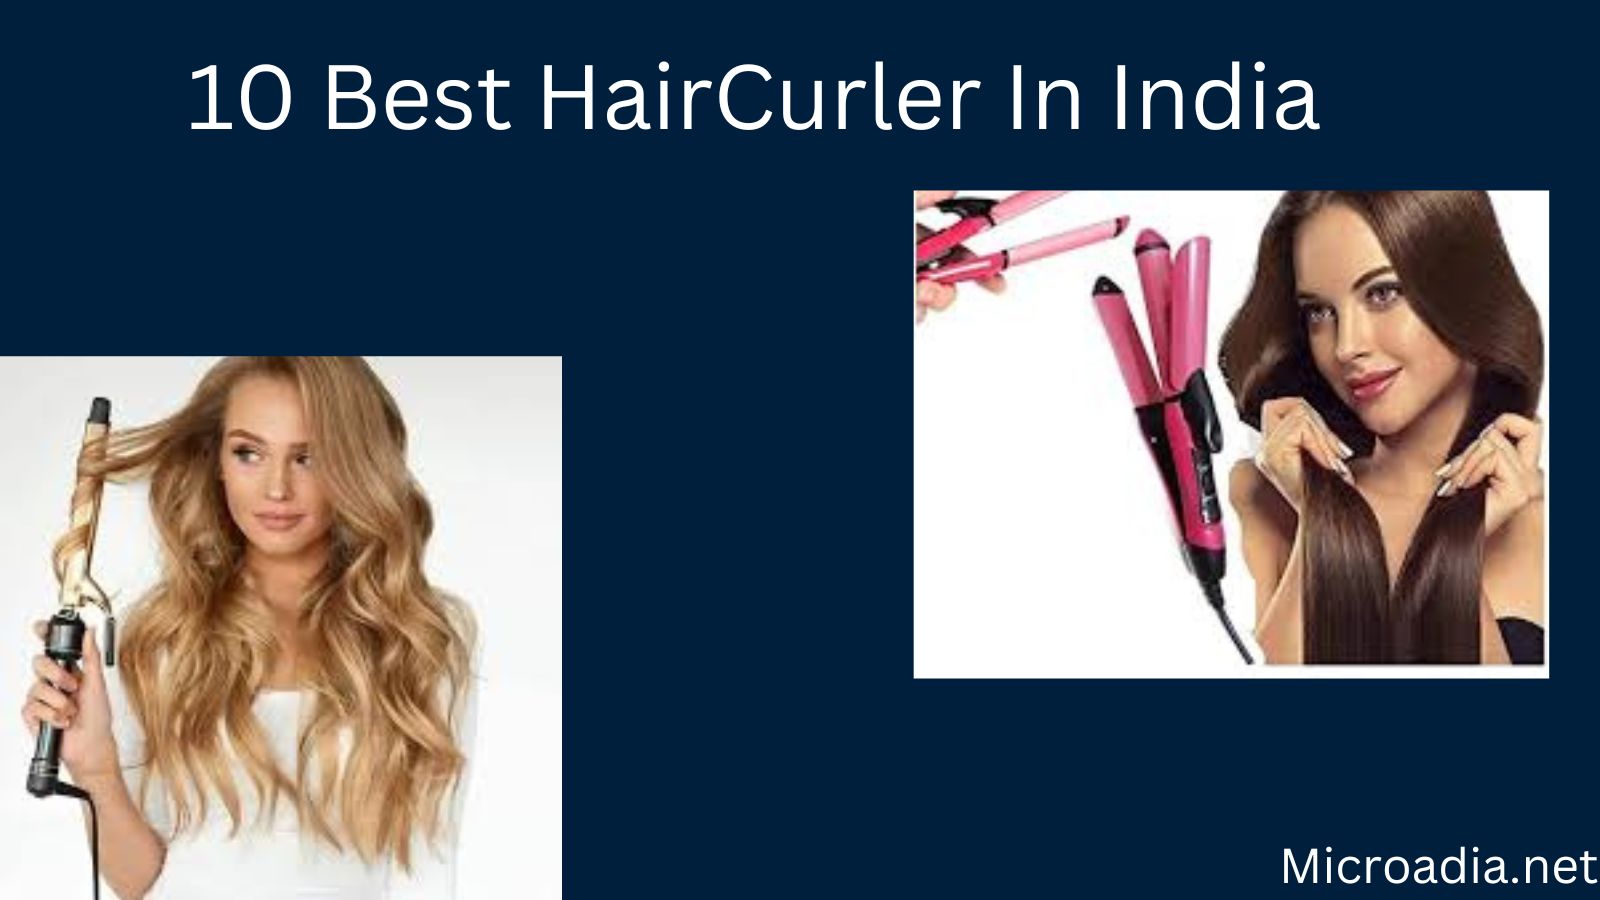 10 Best HairCurler In India